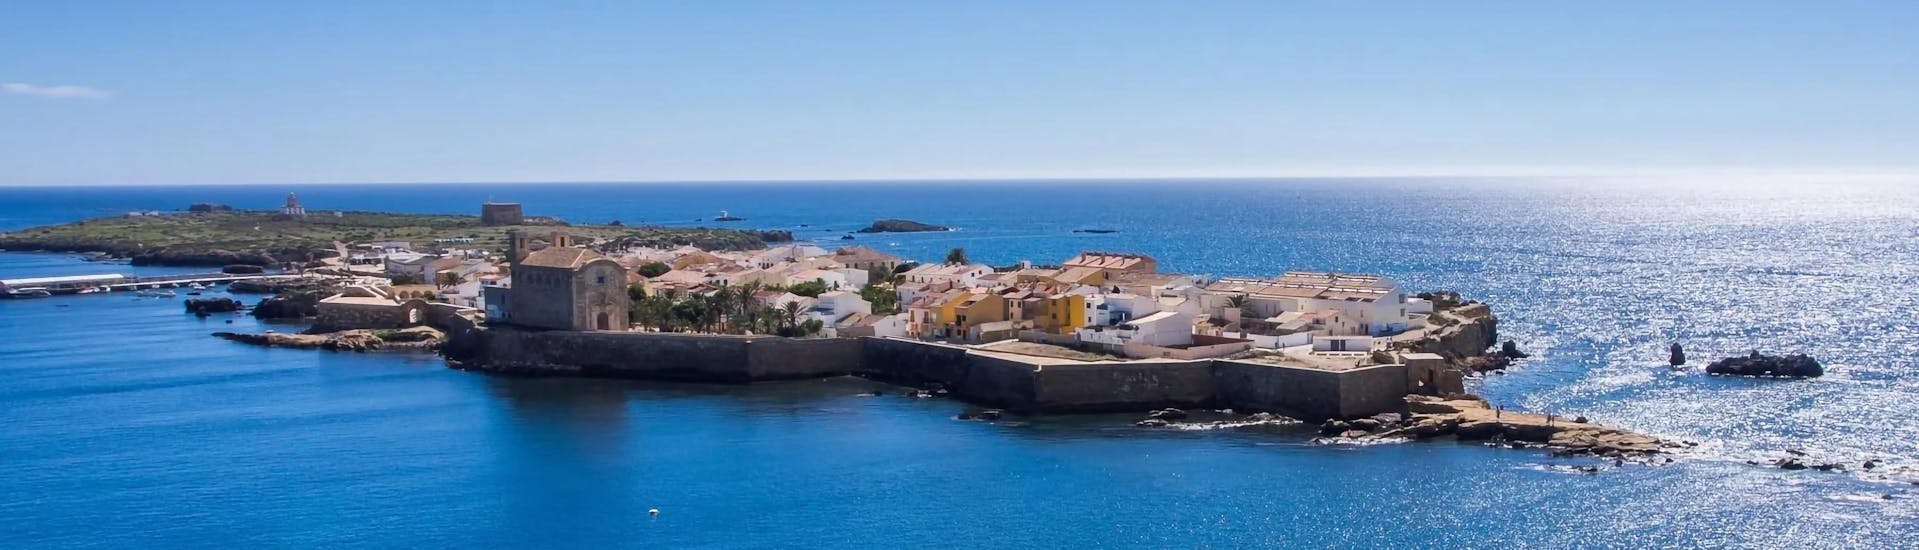 Tabarca, the island that you can see during a ferry trip with Nueva Tabarca.